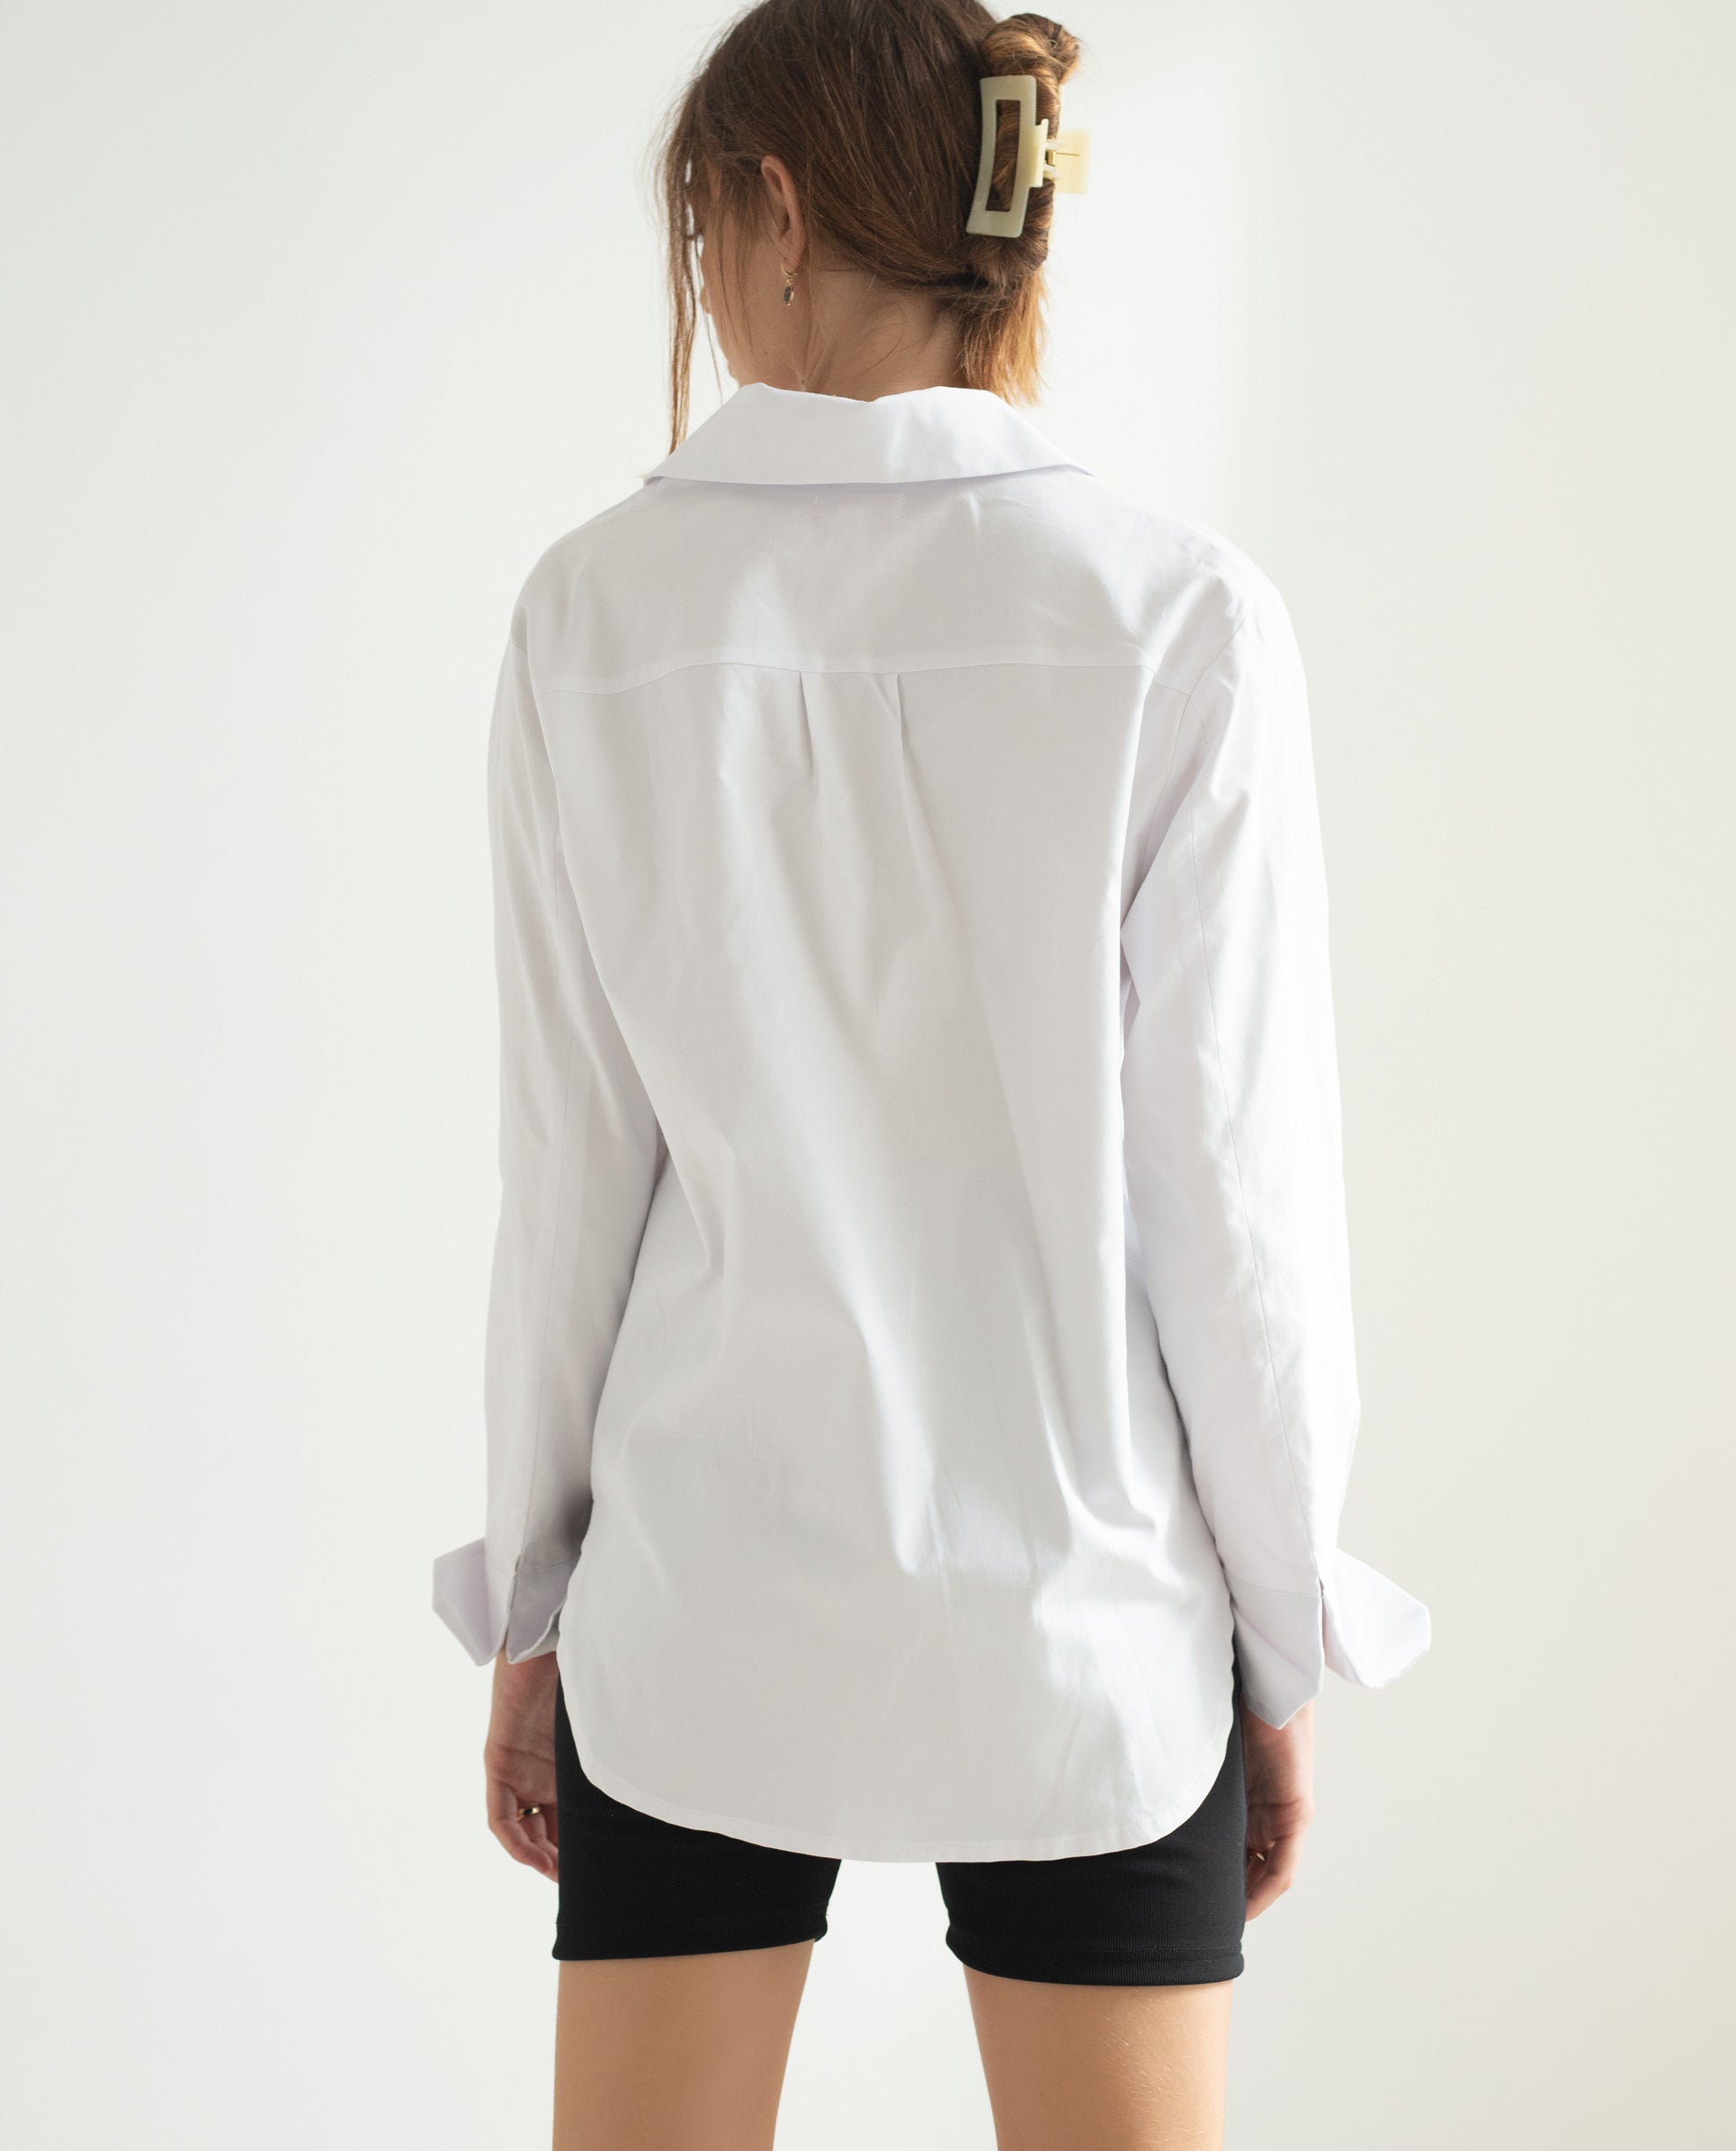 Women's Oversize Women's Shirts THE-ARE